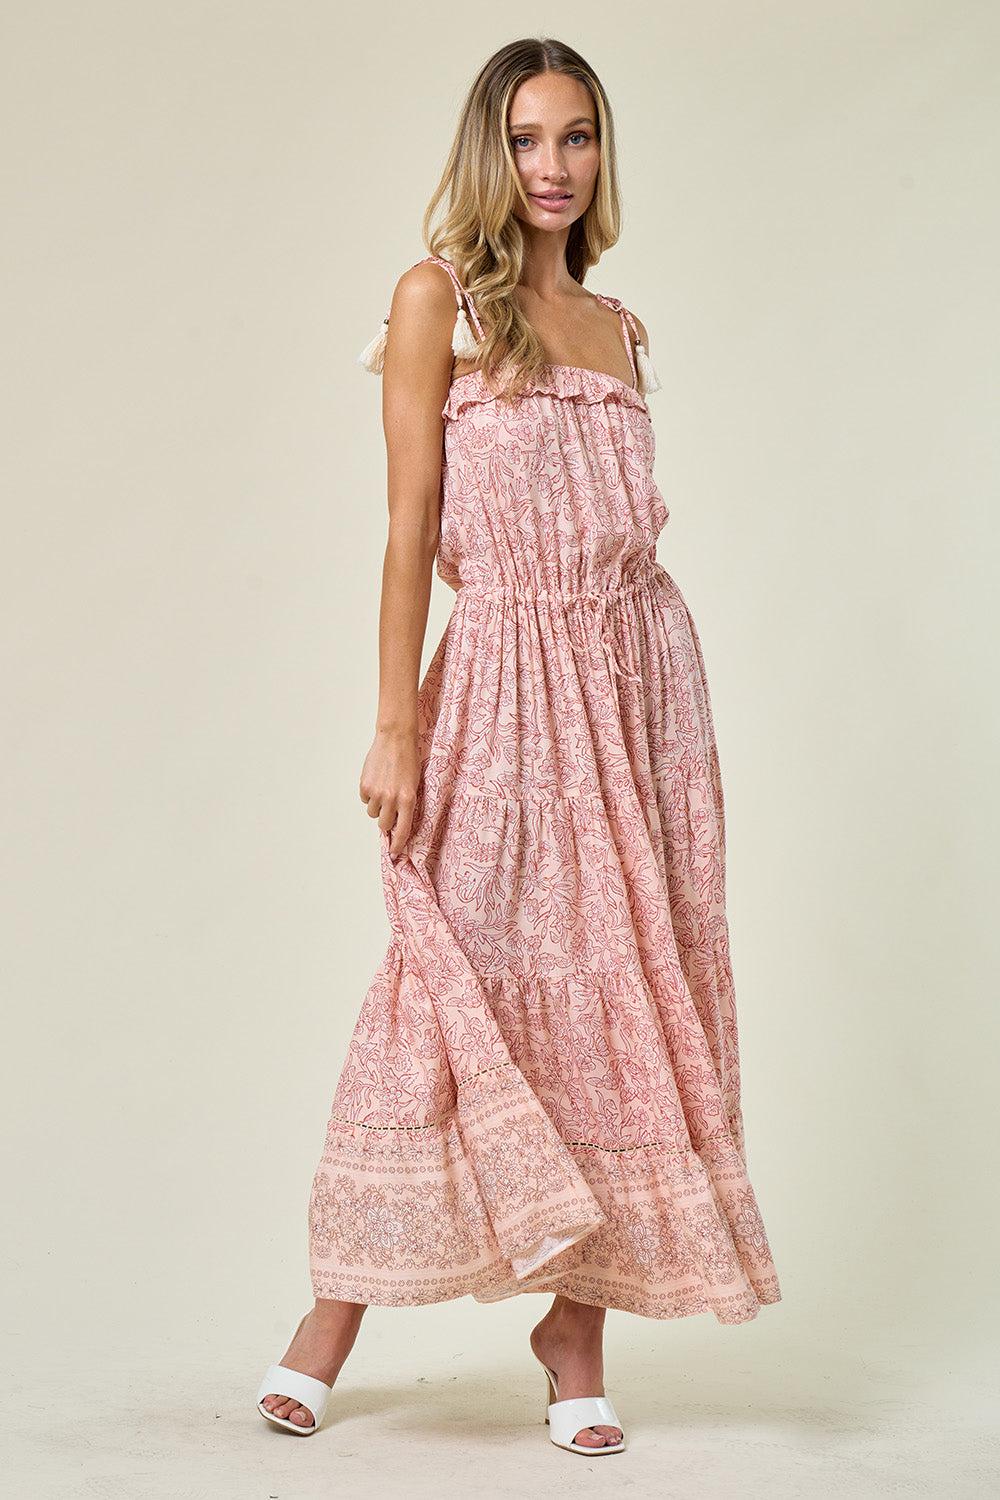 Boho Paisley Print Maxi Dress: Maxi dress with elastic waist and tassel ties, adjustable tassel straps, tiered skirt with crochet inset detail, pull-on style, and ruffle bodice. Embrace boho-chic fashion for a stylish and comfortable look.